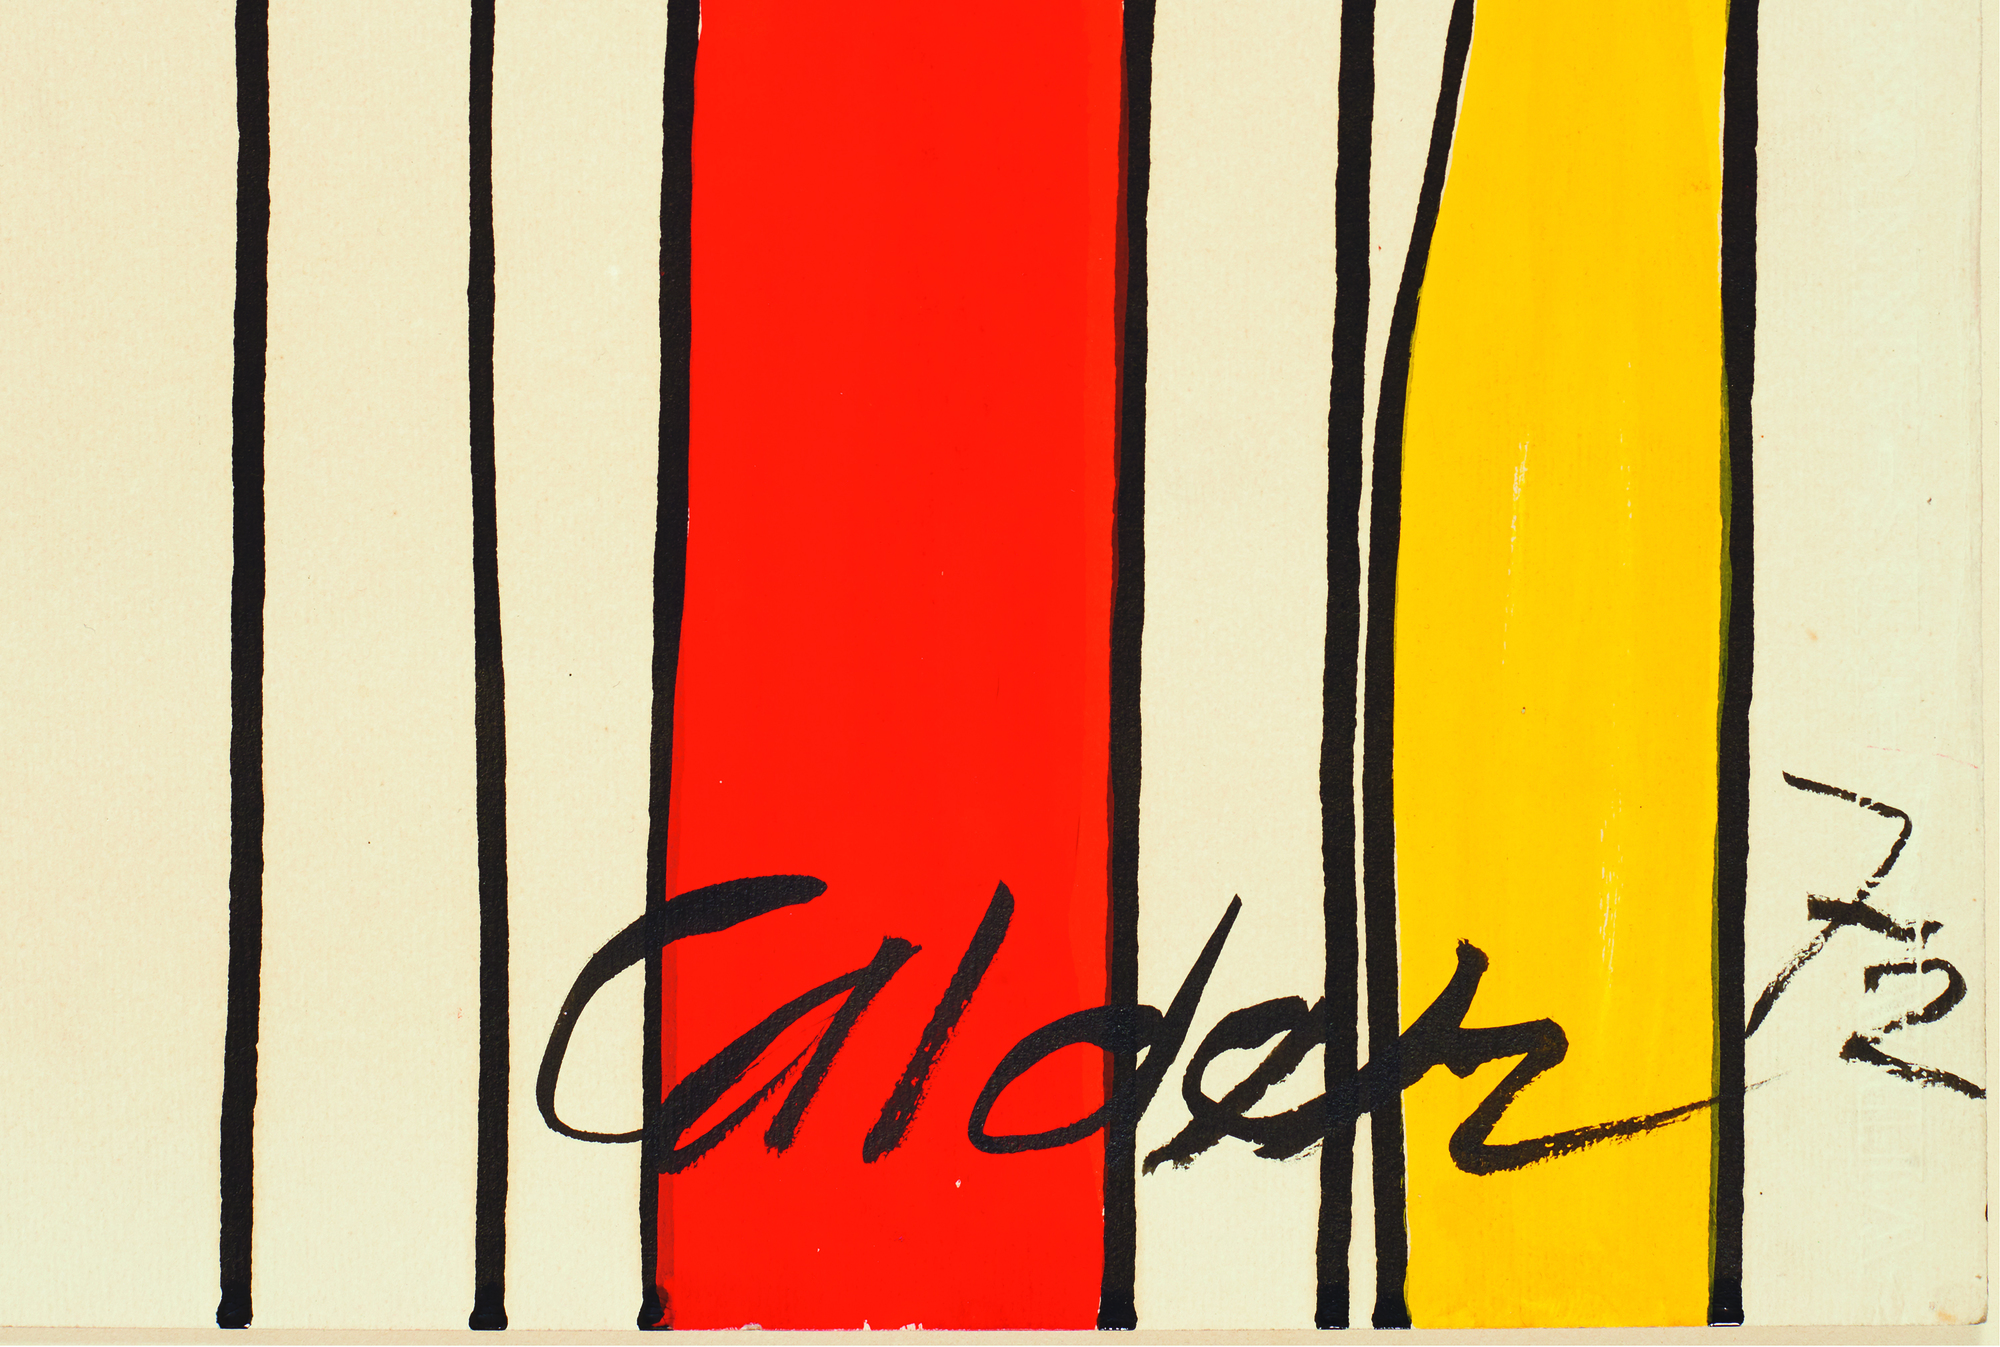 ALEXANDER CALDER - The Forest - gouache and ink on paper - 43 x 29 1/4 in.